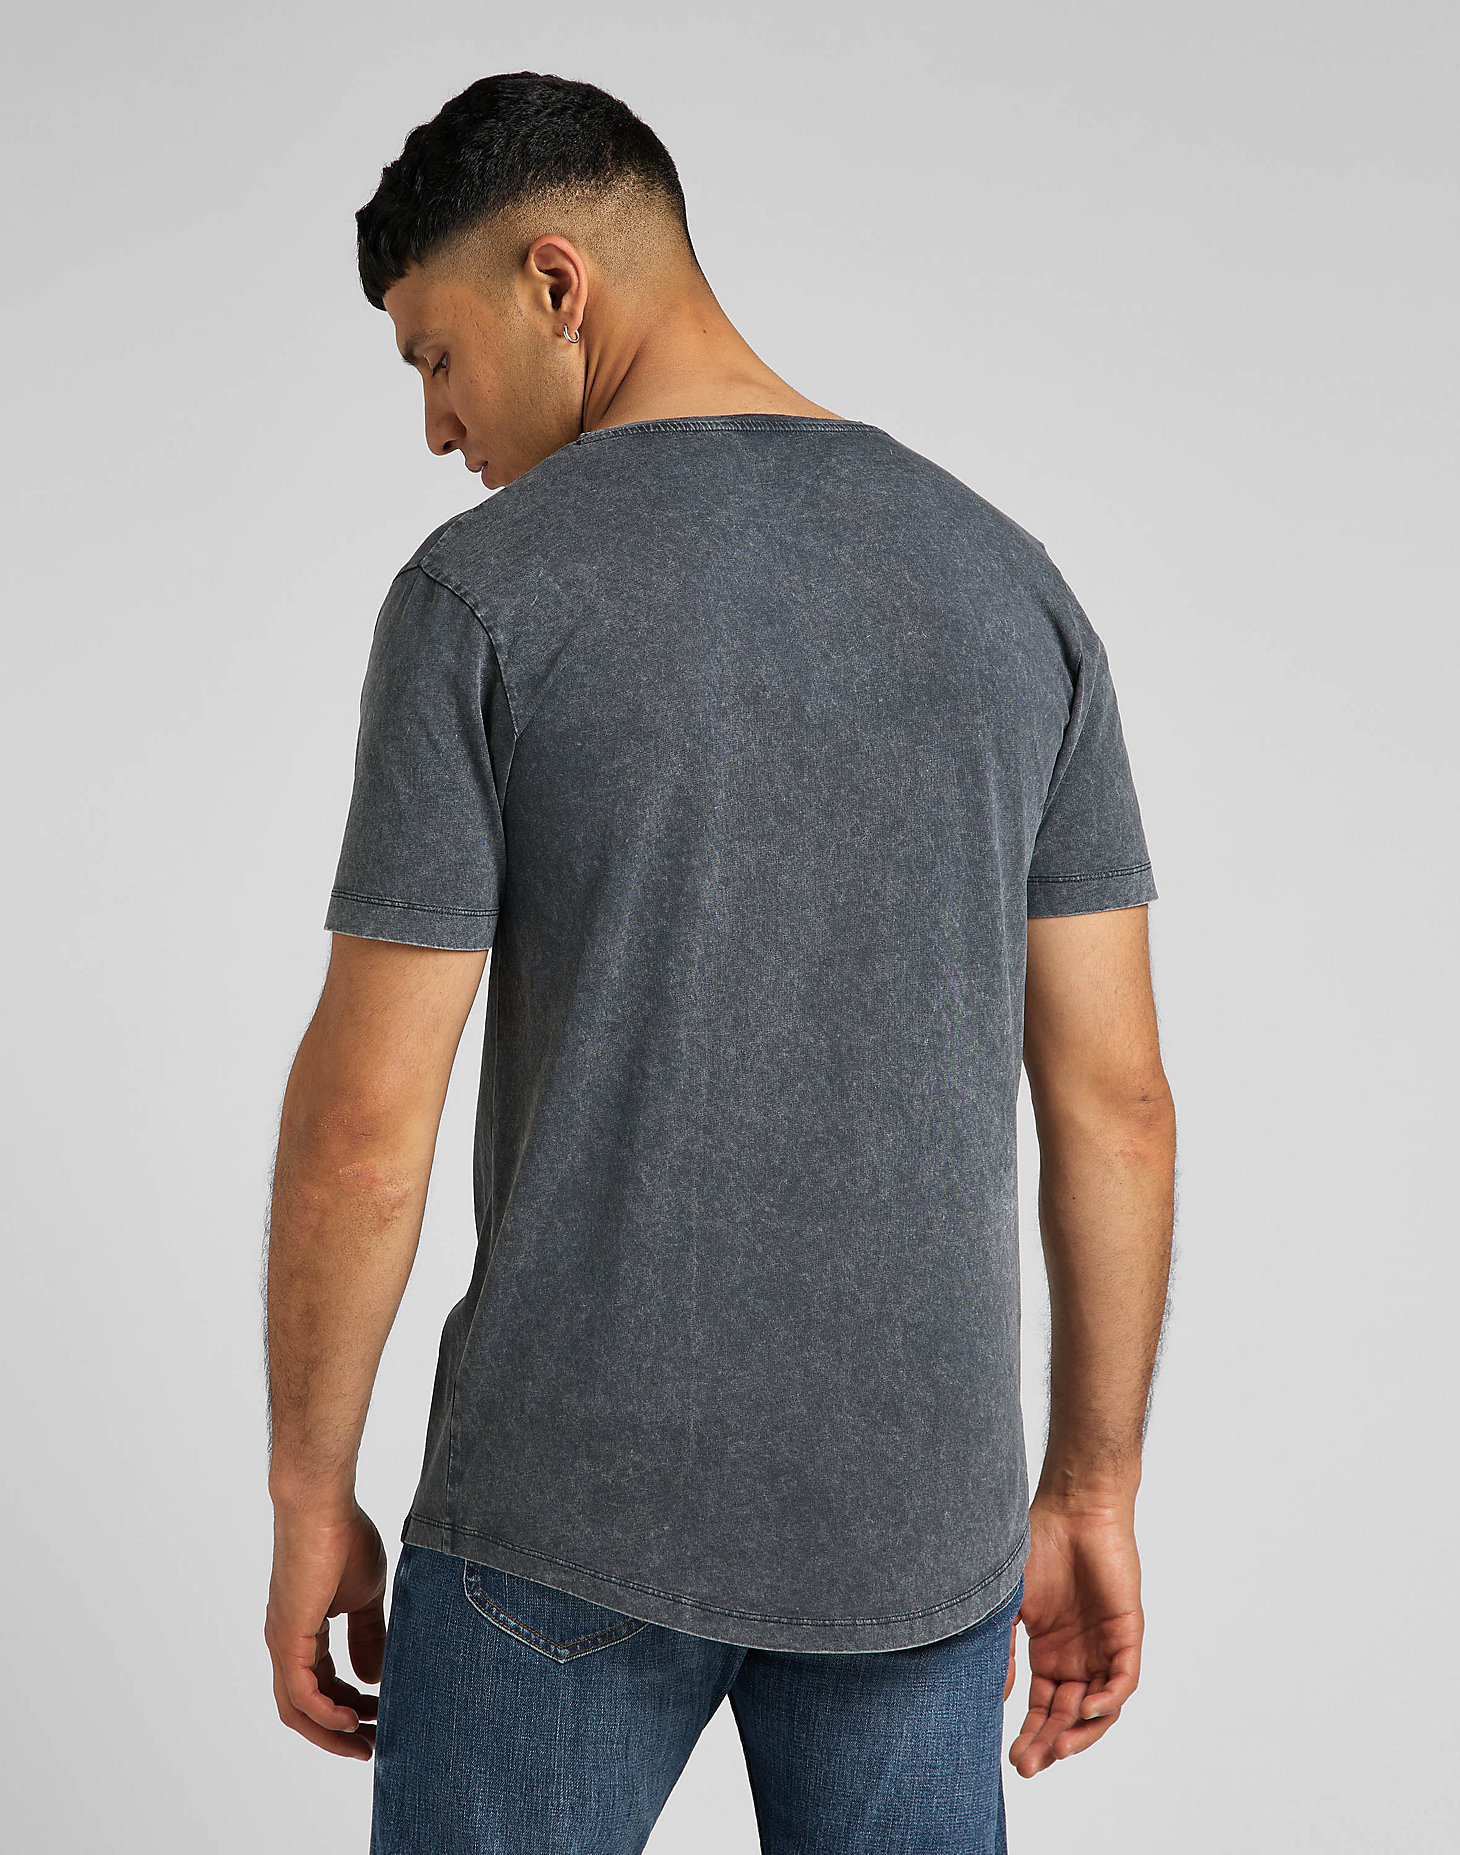 Shaped Tee in Charcoal alternative view 1